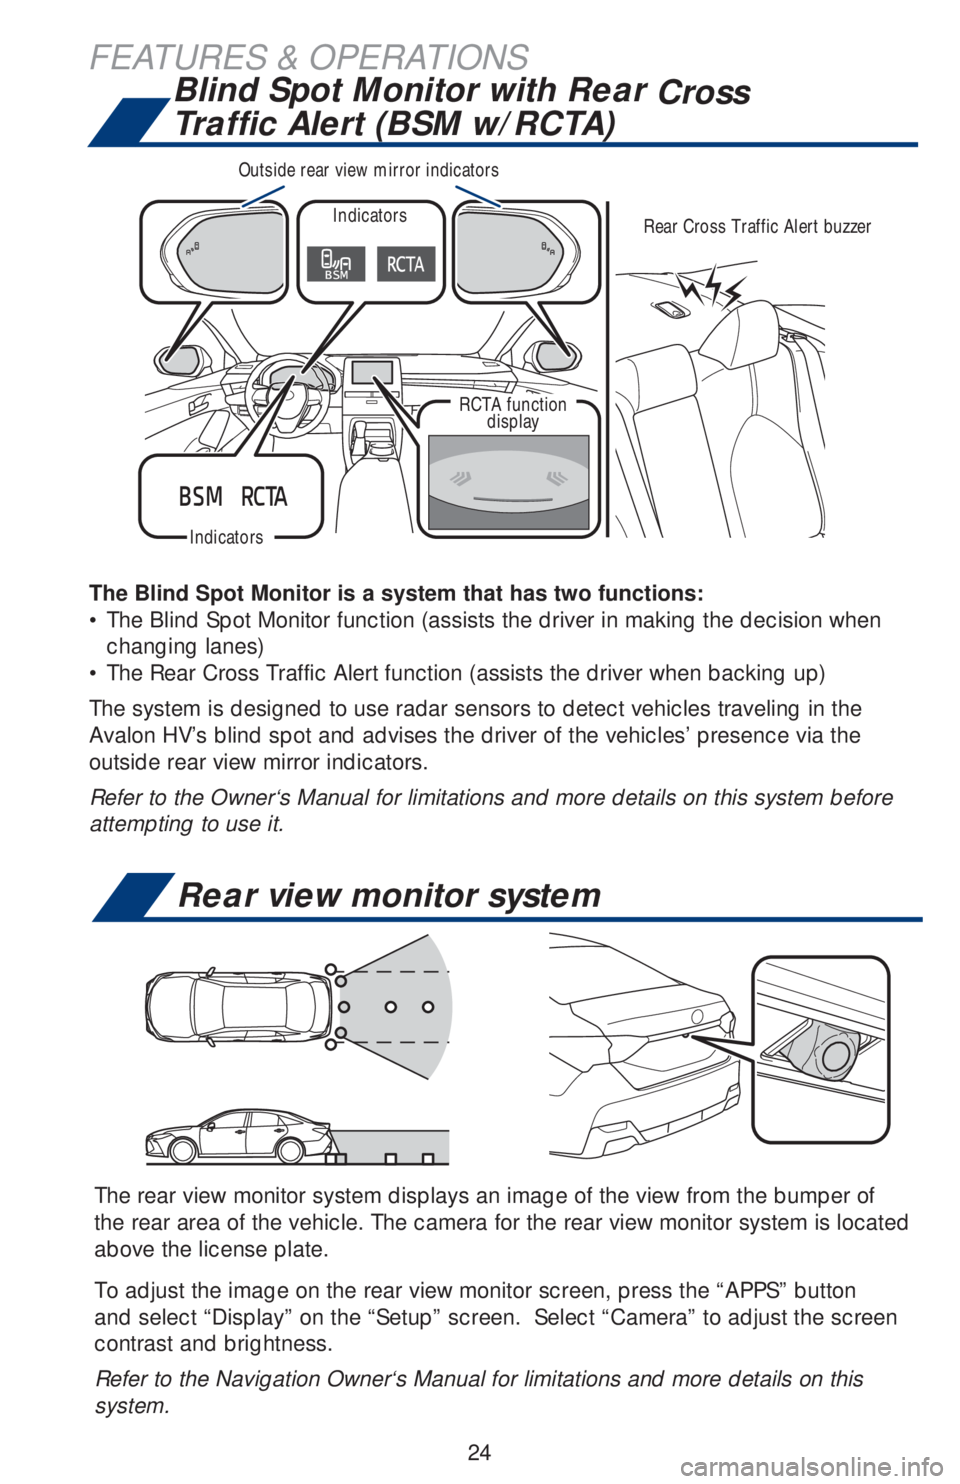 TOYOTA AVALON HYBRID 2019  Owners Manual (in English) 24
FEATURES & OPERATIONS
The Blind Spot Monitor is a system that has two functions:
• The Blind Spot Monitor function (assists the driver in making the decision when 
changing lanes)
• The Rear Cr